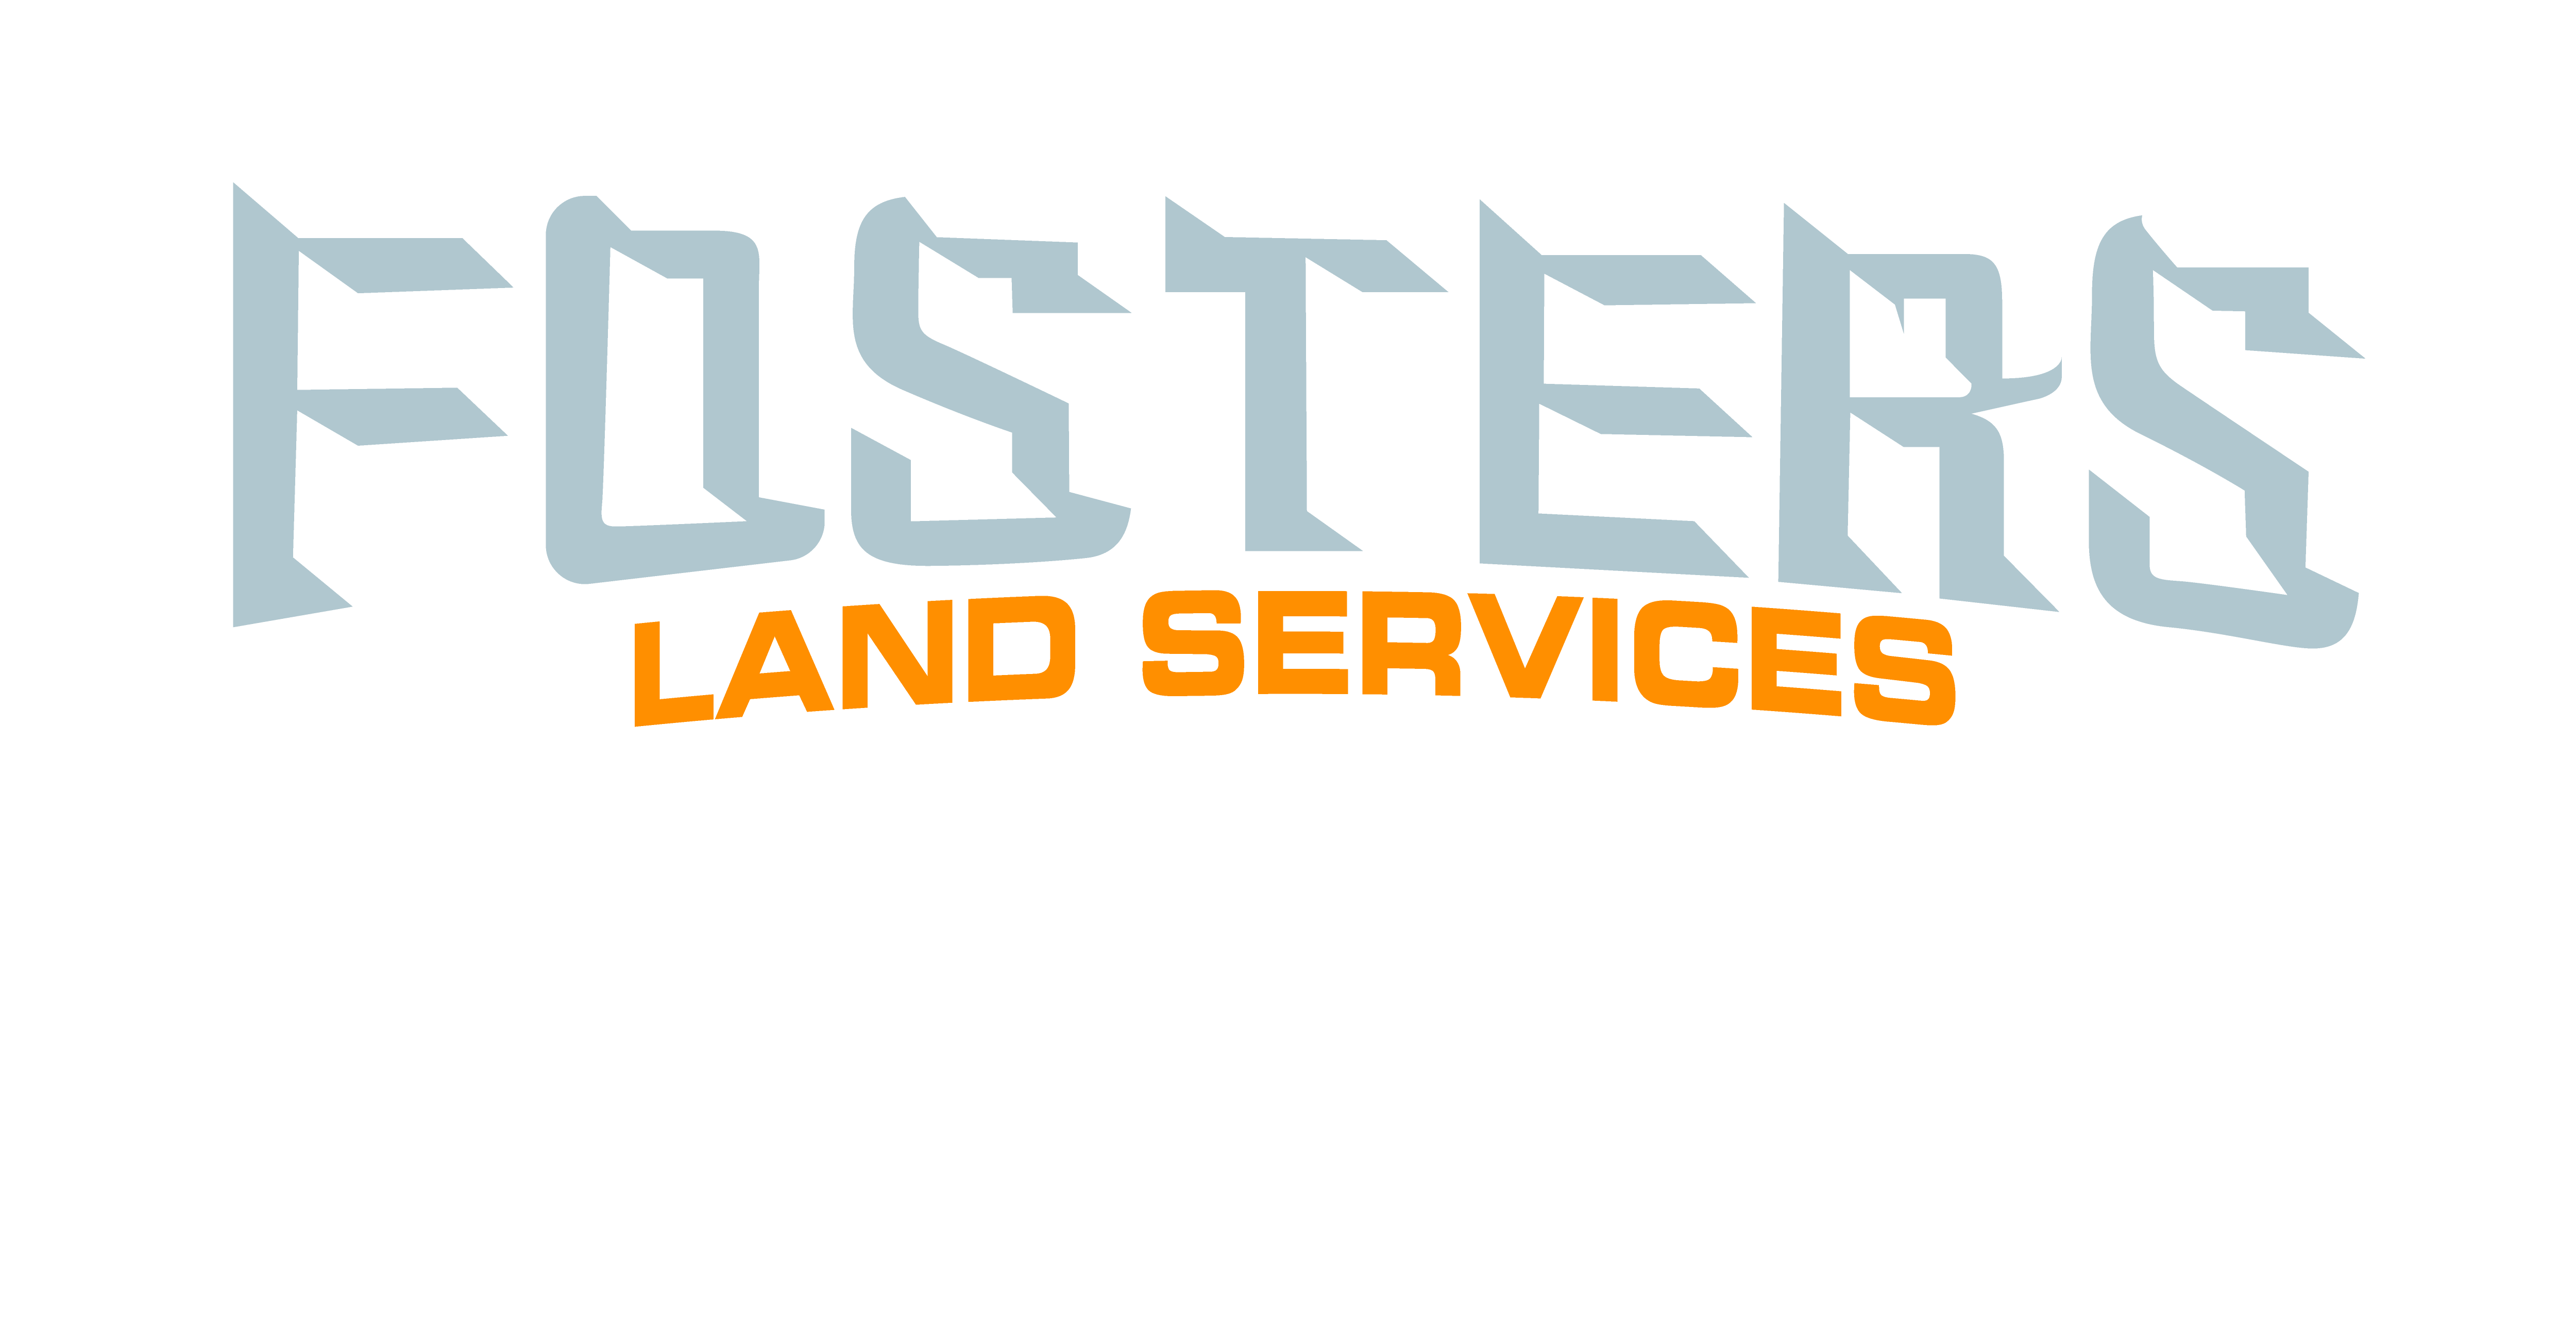 Fosters Land Services